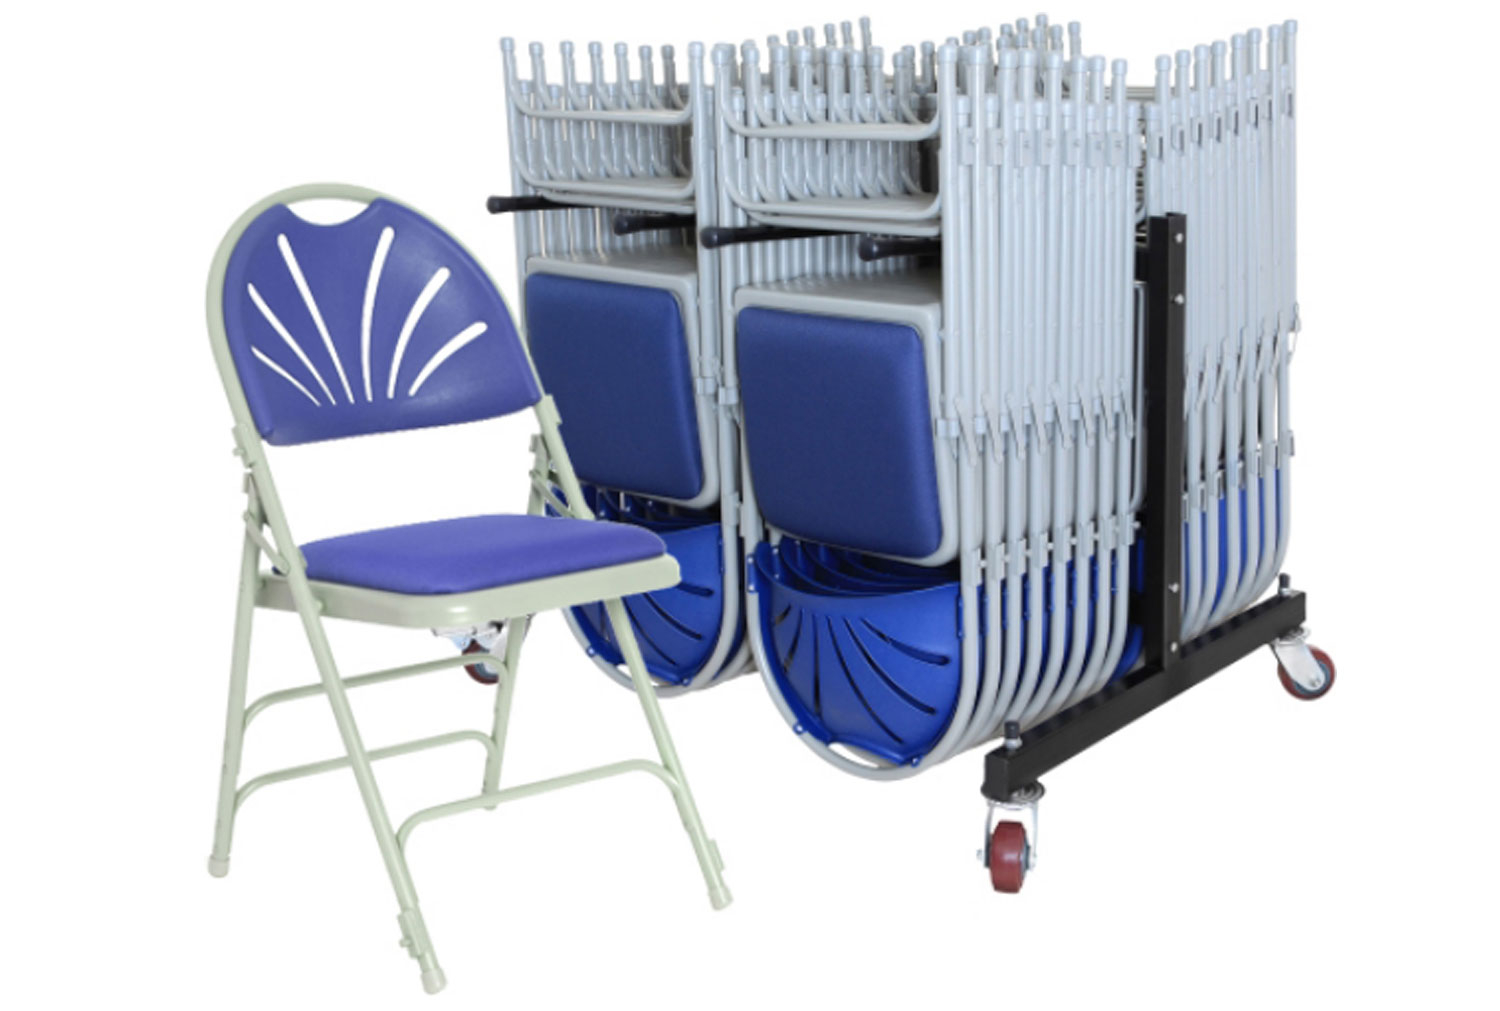 Deluxe Padded Folding Office Chair Bundle Deal (28 Office Chairs & 1 Trolley), Blue